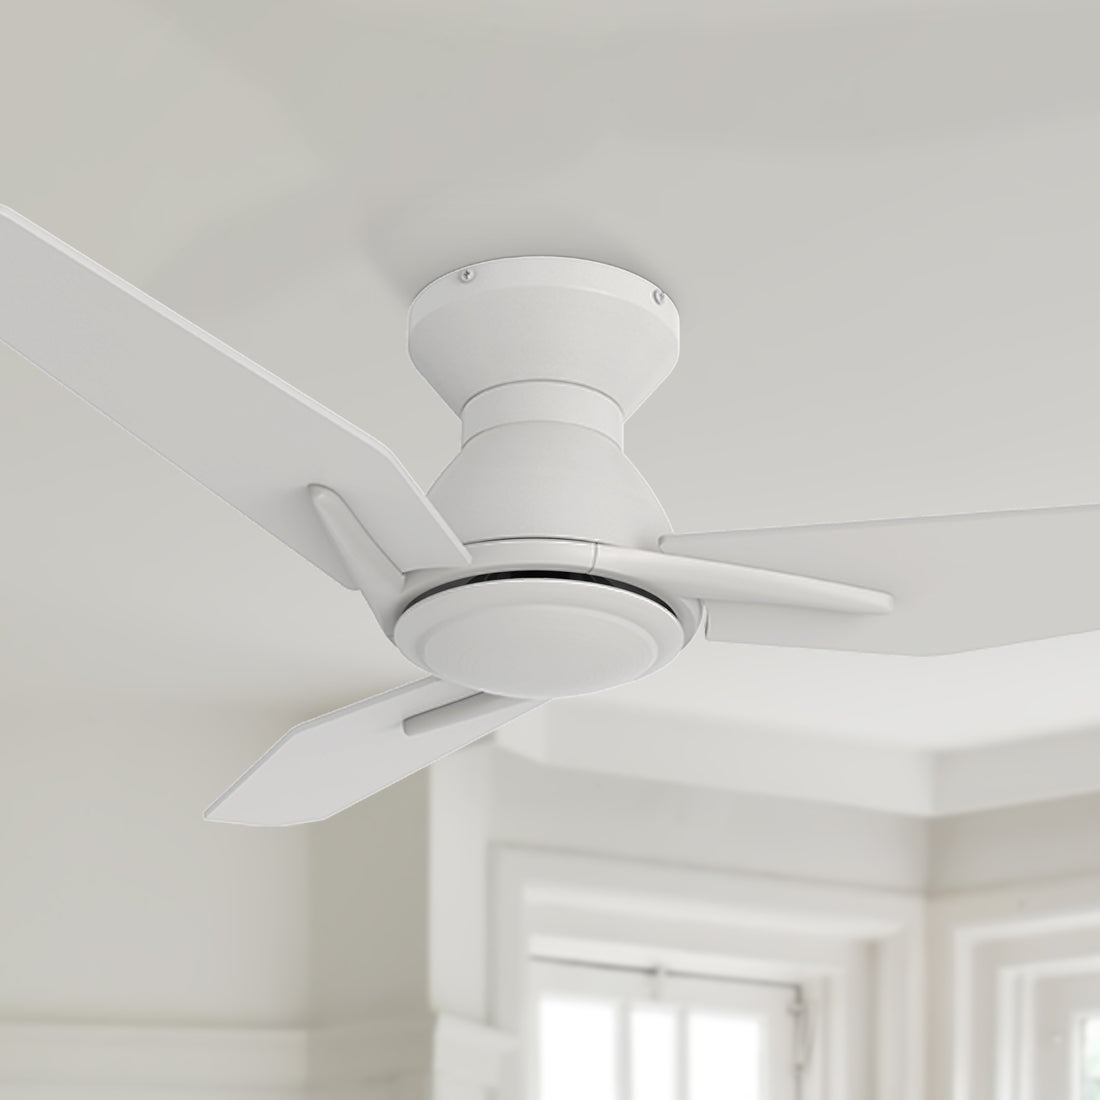 Carro smafan low-profile ceiling fans without lights 44 inch, white finish 